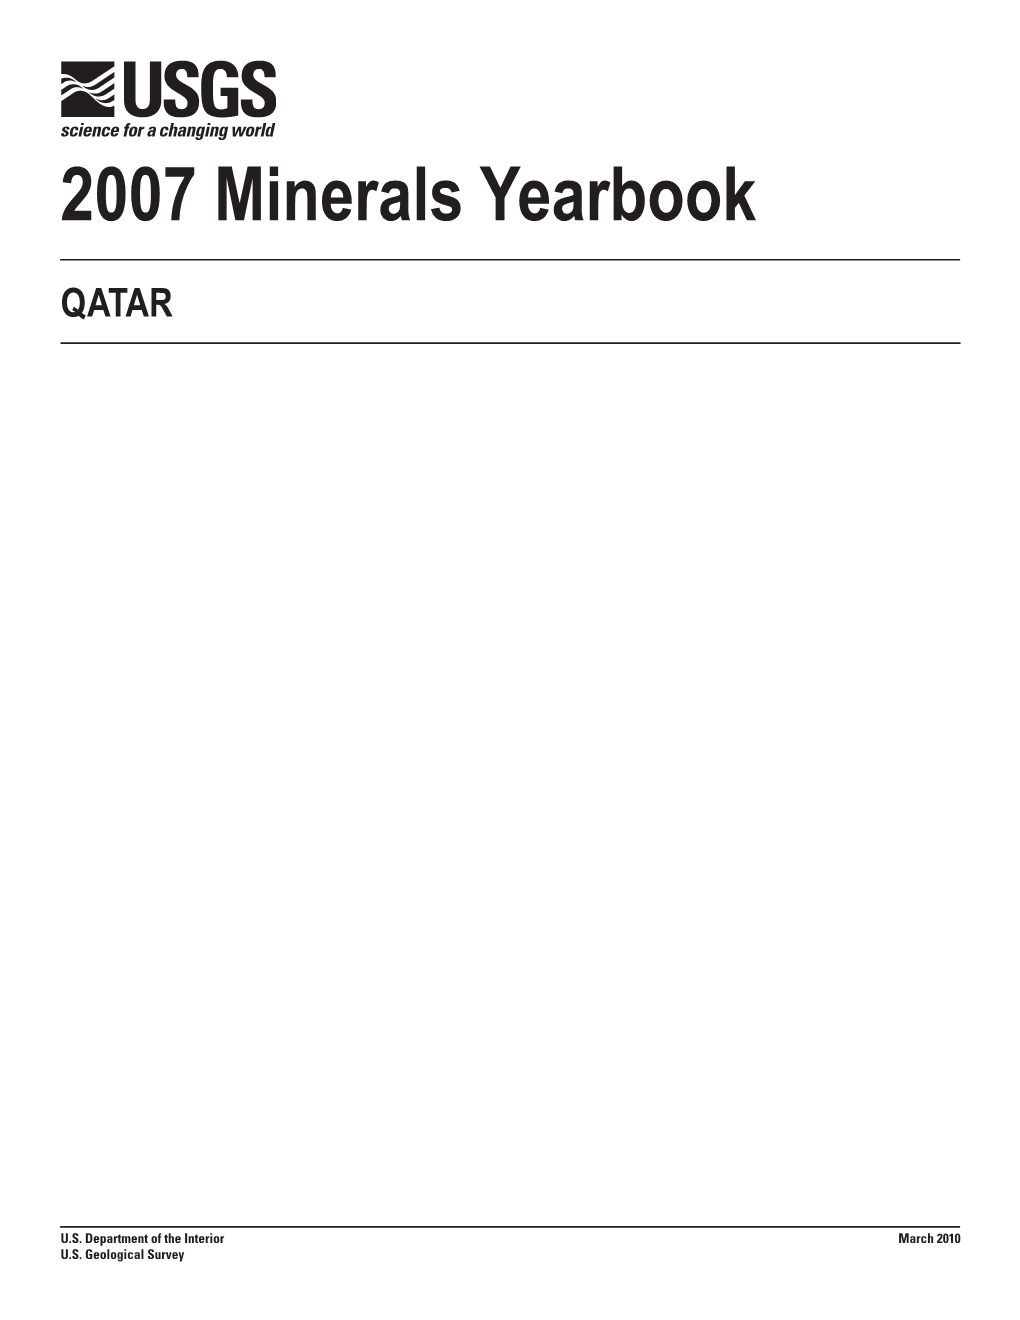 The Mineral Industry of Qatar in 2007